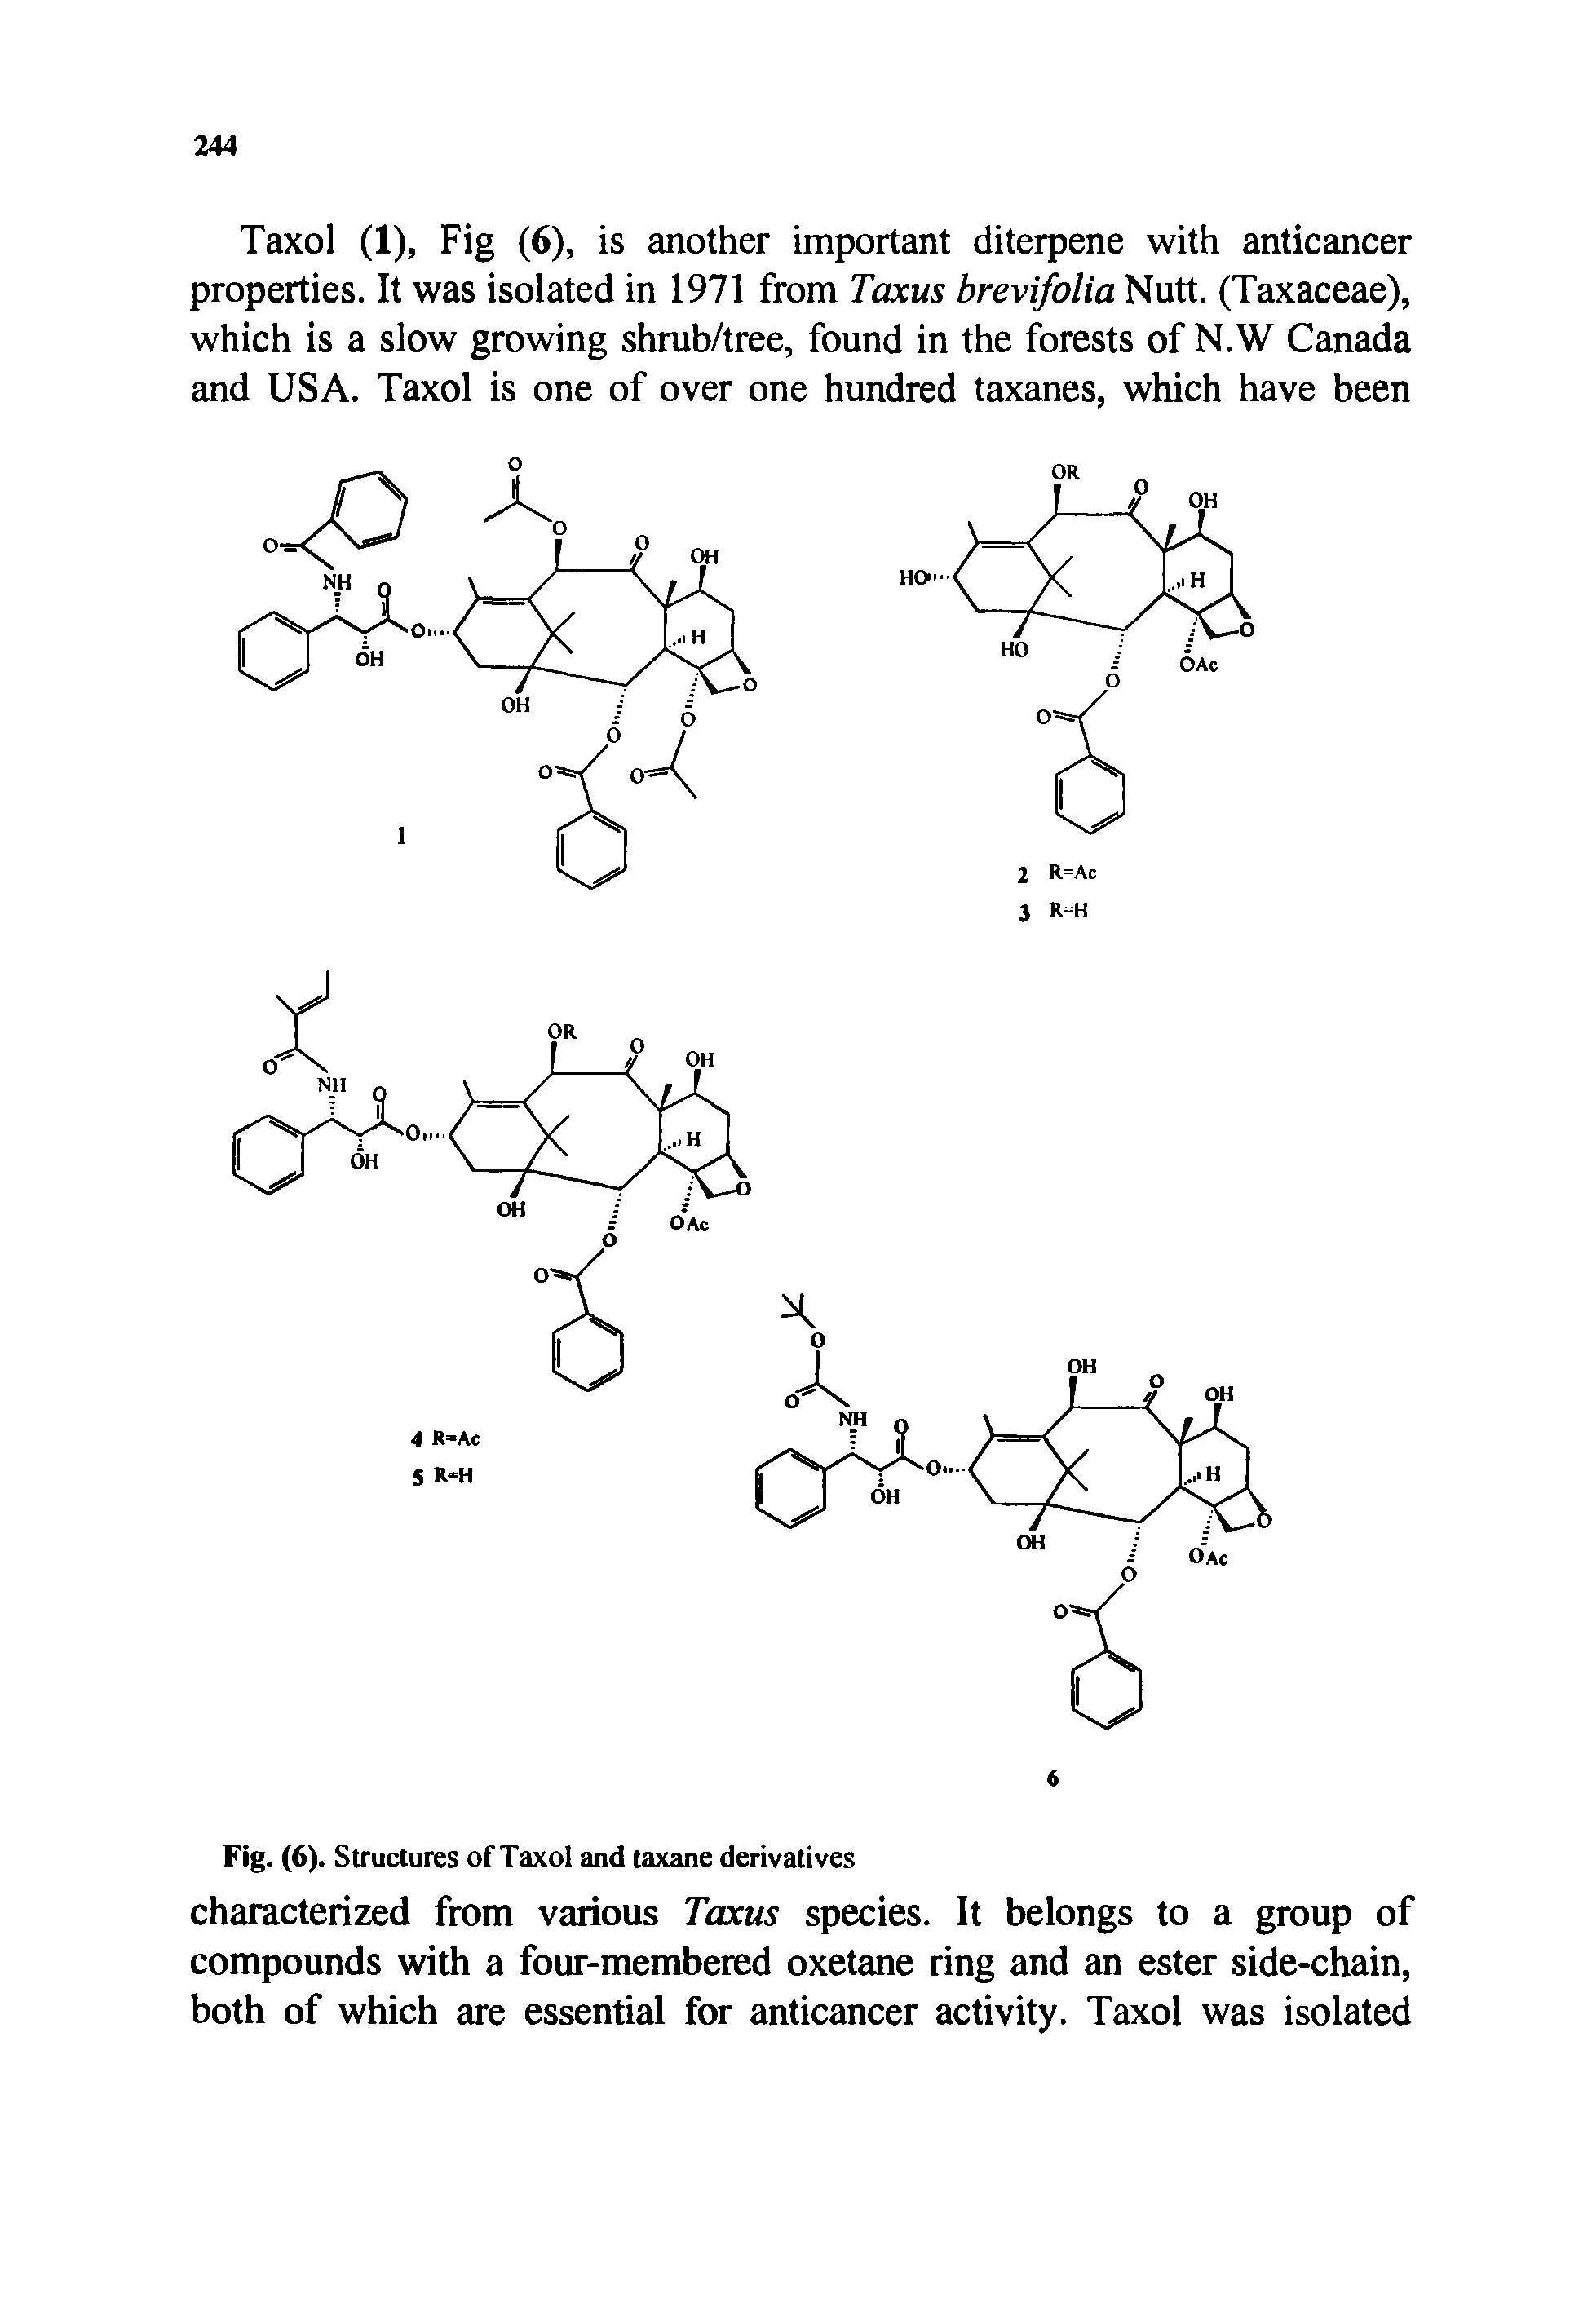 Fig. (6). Structures of Taxol and taxane derivatives characterized from various Taxus species. It belongs to a group of compounds with a four-membered oxetane ring and an ester side-chain, both of which are essential for anticancer activity. Taxol was isolated...